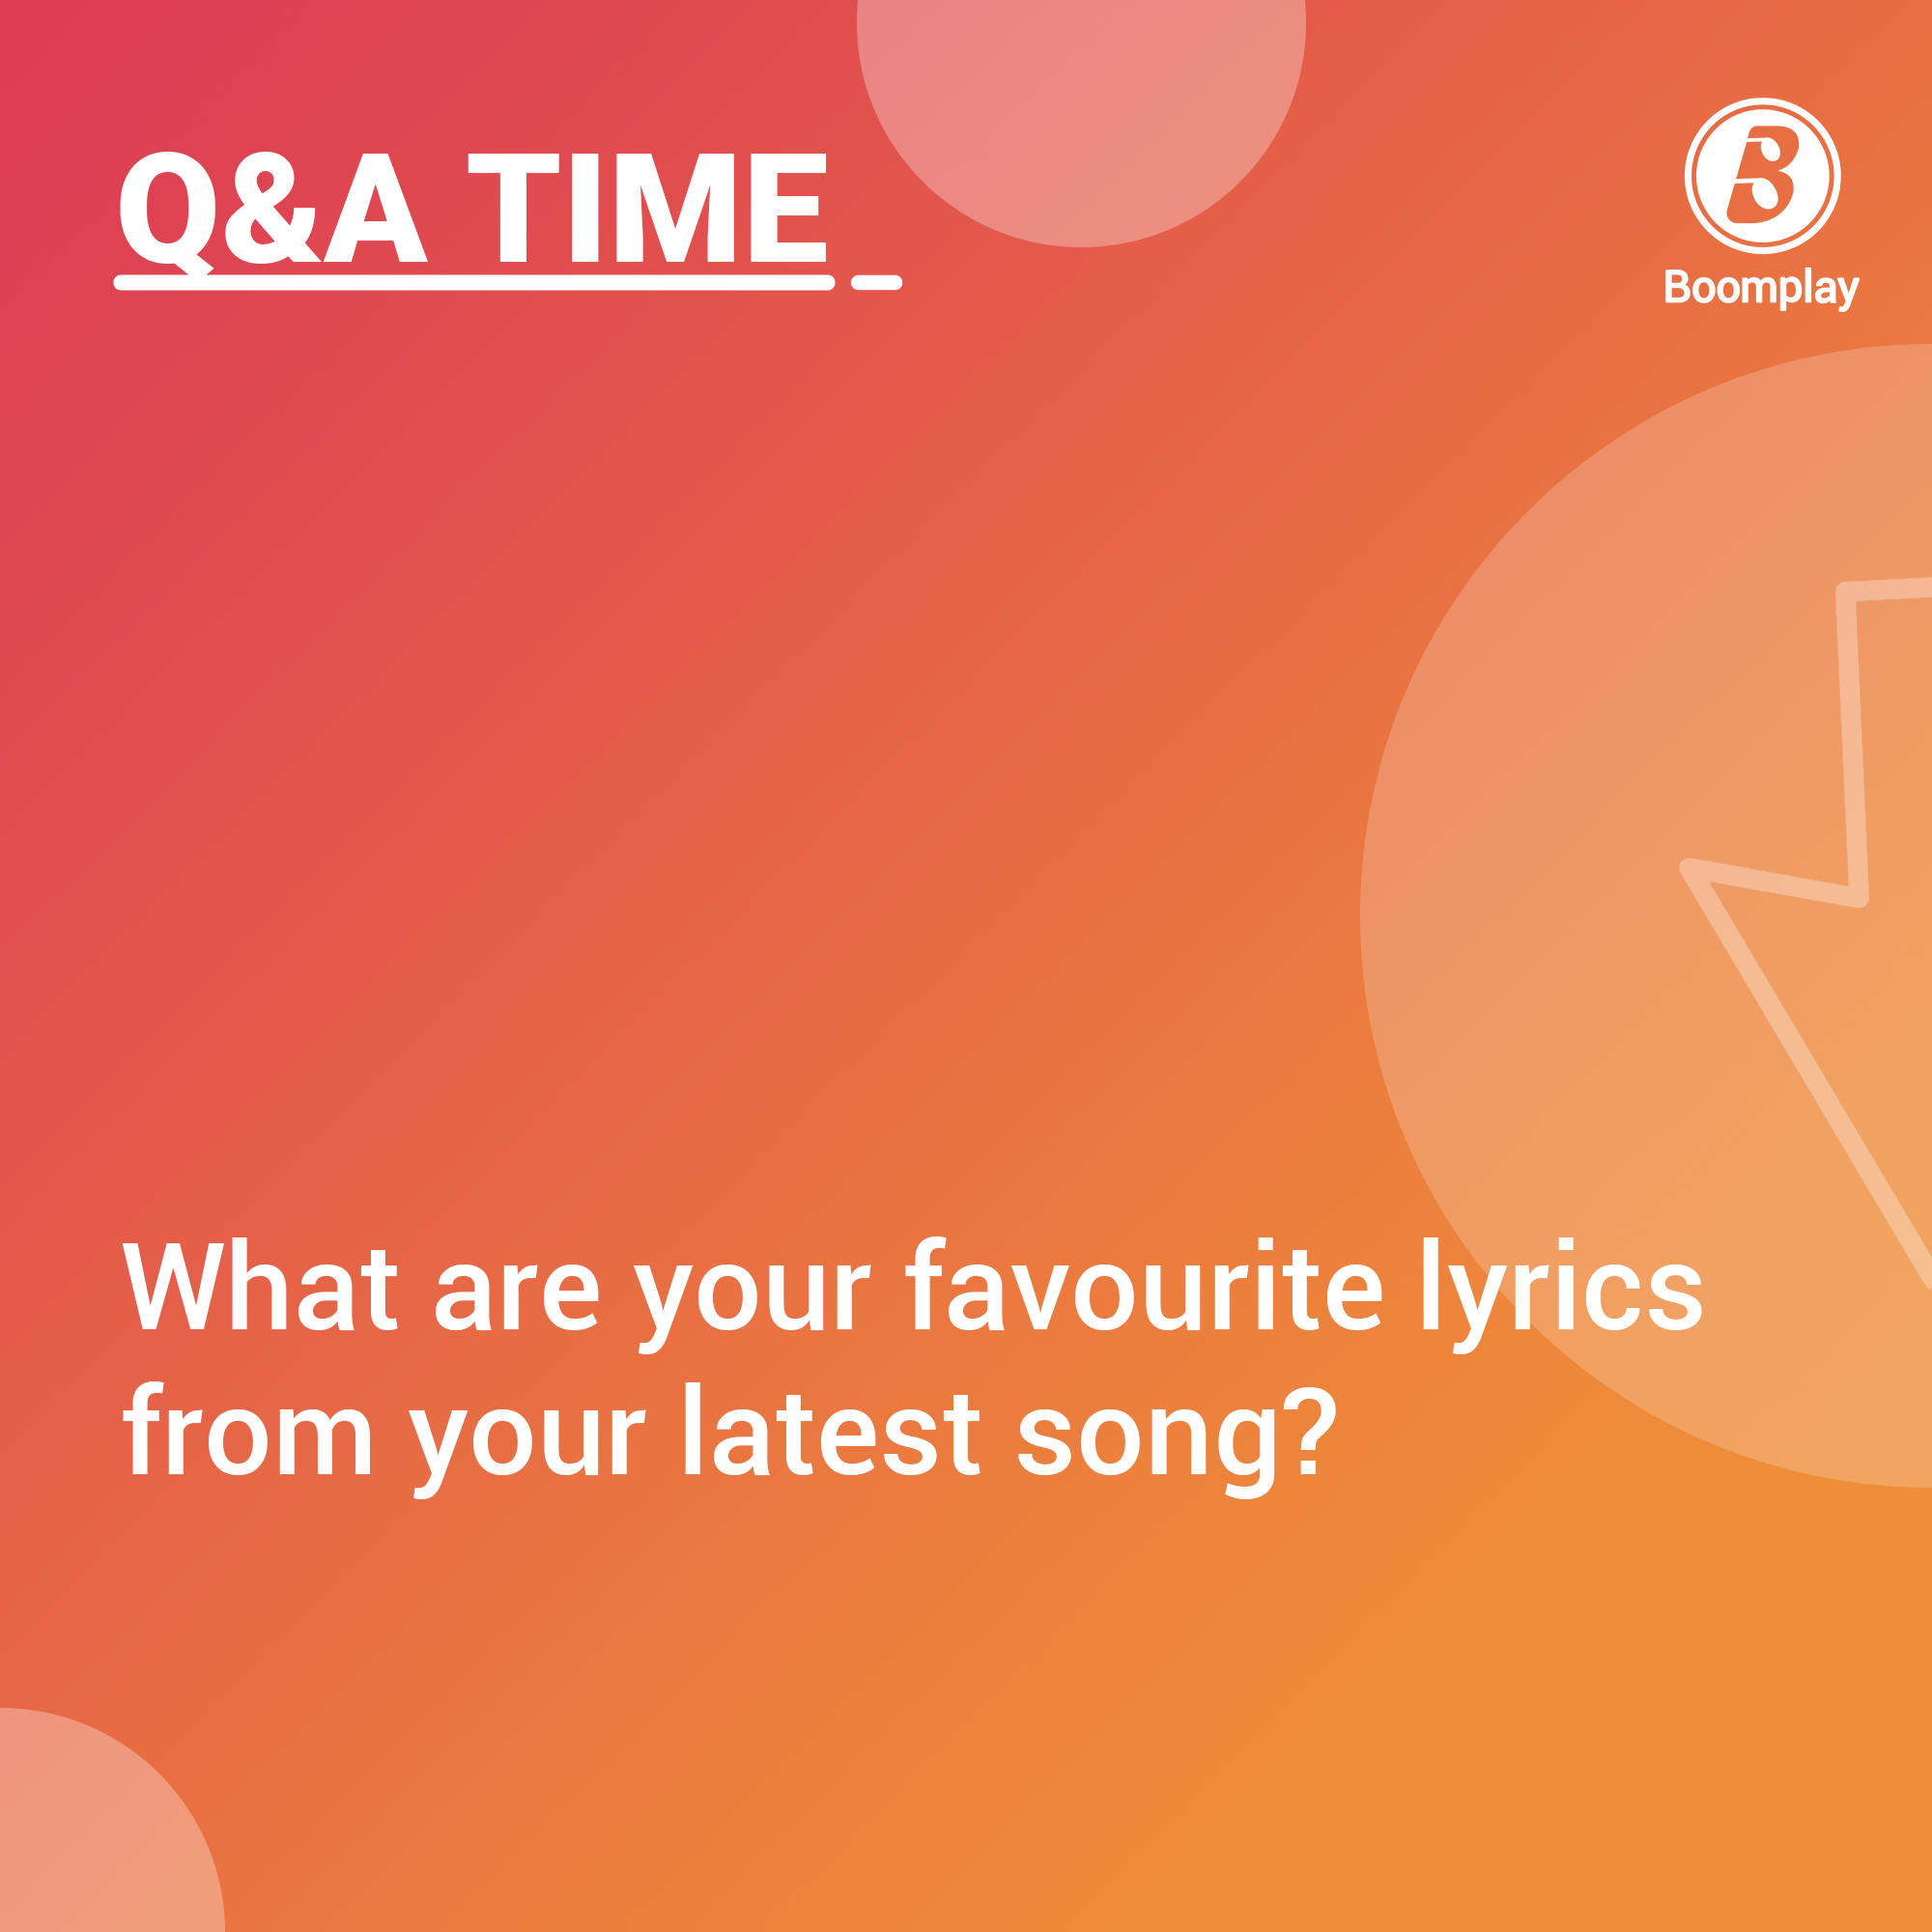 Q&A Times!! What are your favourite lyrics from your latest song?